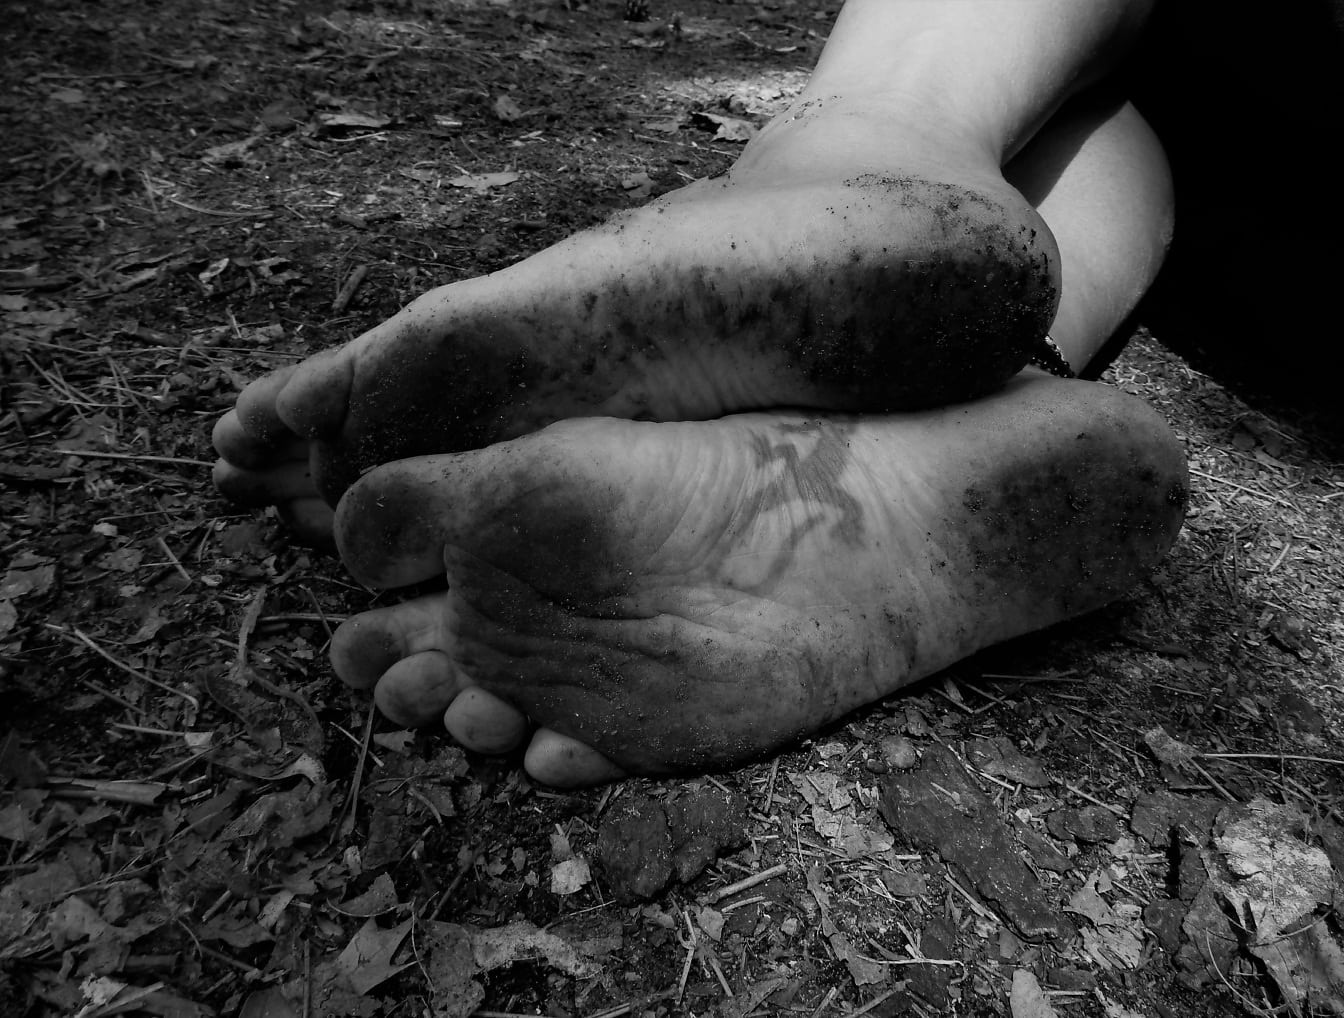 Monochrome photograph of dirty barefoot feet on ground